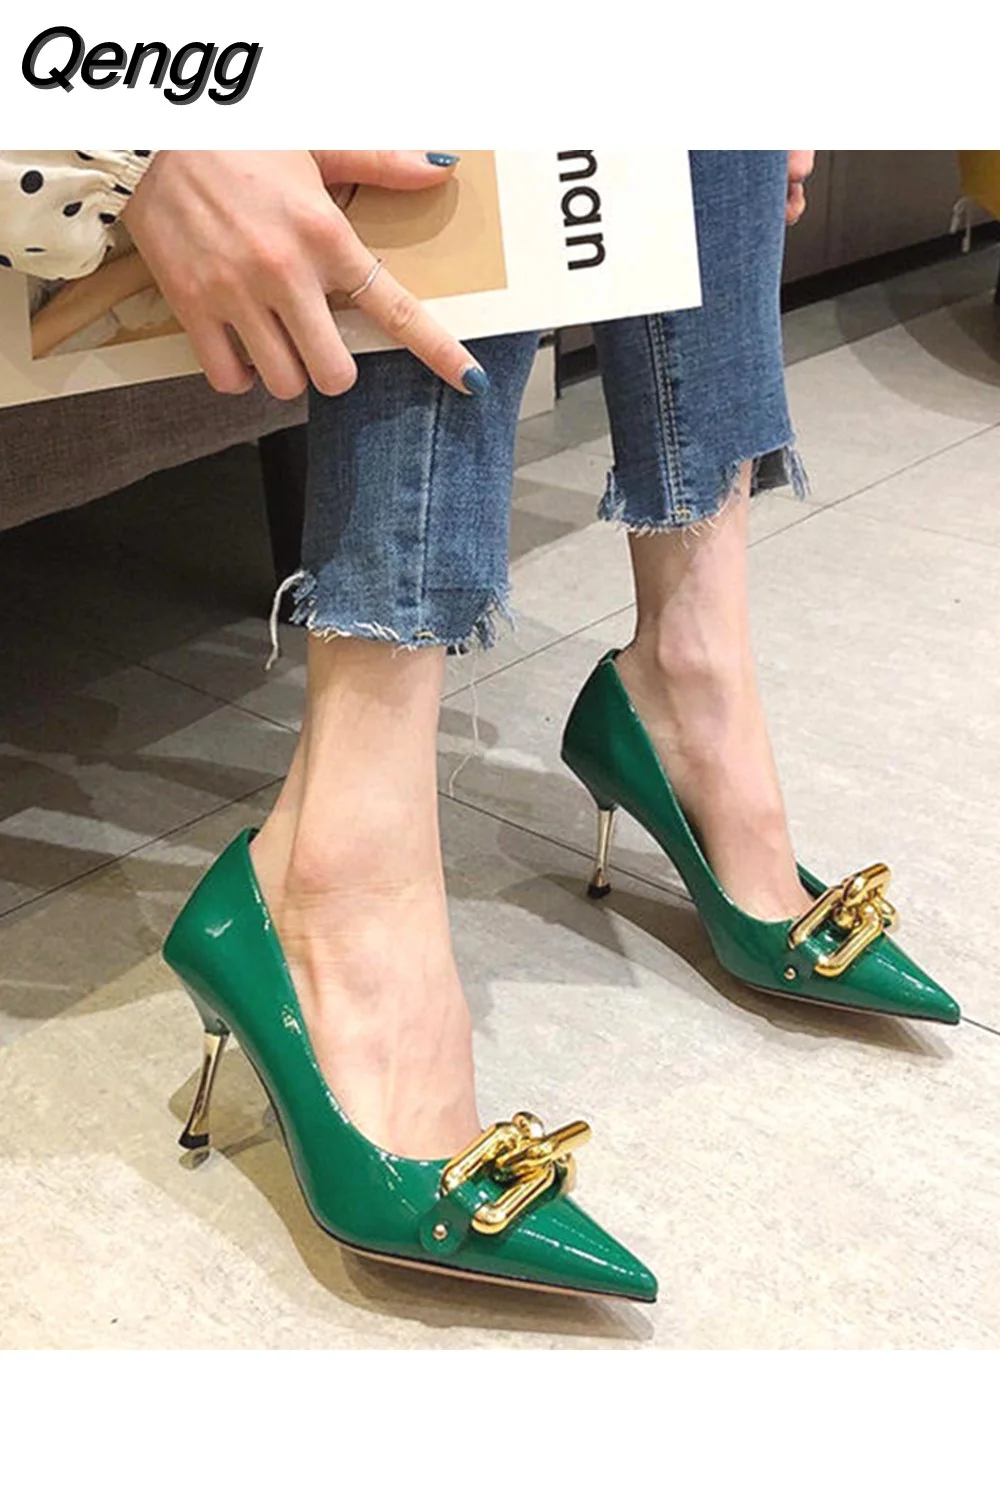 Qengg Heeled Shoes 2023 Pointed Toe Stiletto Shoes Women Green Pumps Patent Leather High Heels with Metal Chain Ladies Office